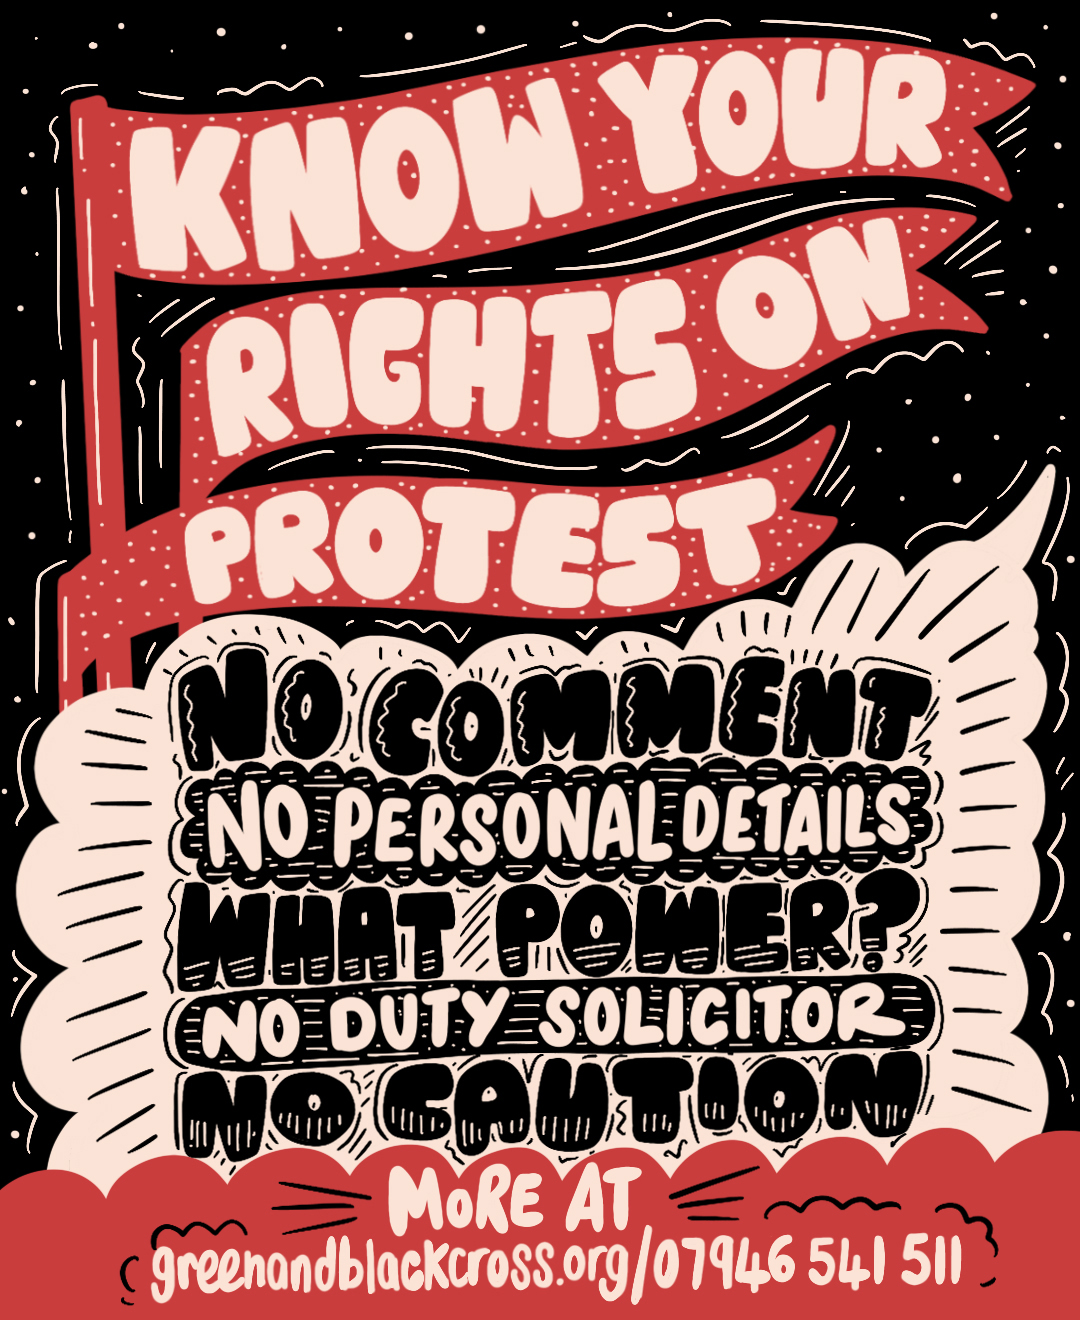 Know Your Rights on protest. This graphic lists the 5 Key Messages.